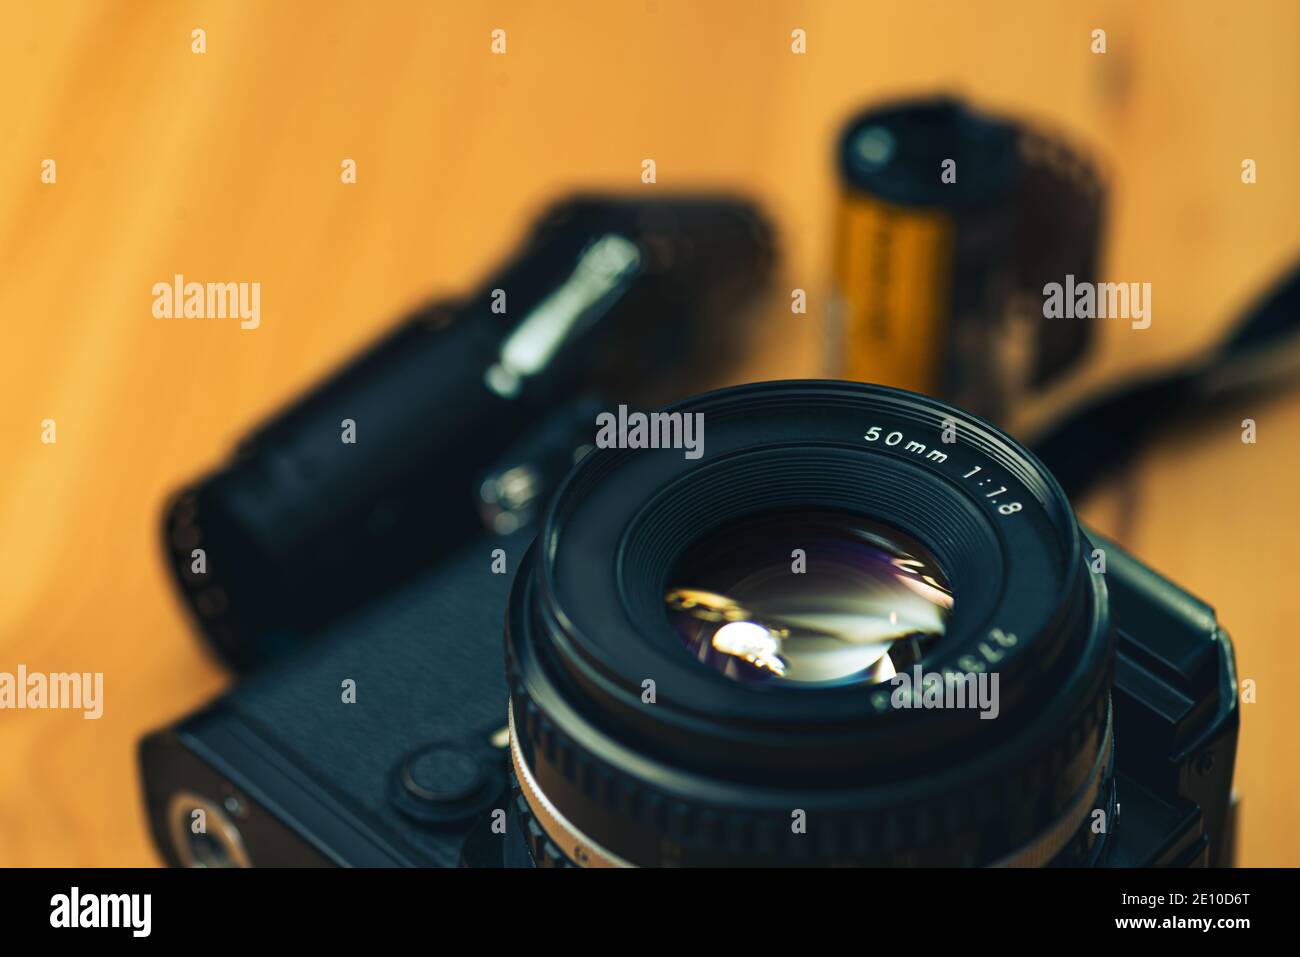 Still life image of an analog camera with some 35mm negative film  on a wooden background. Stock Photo